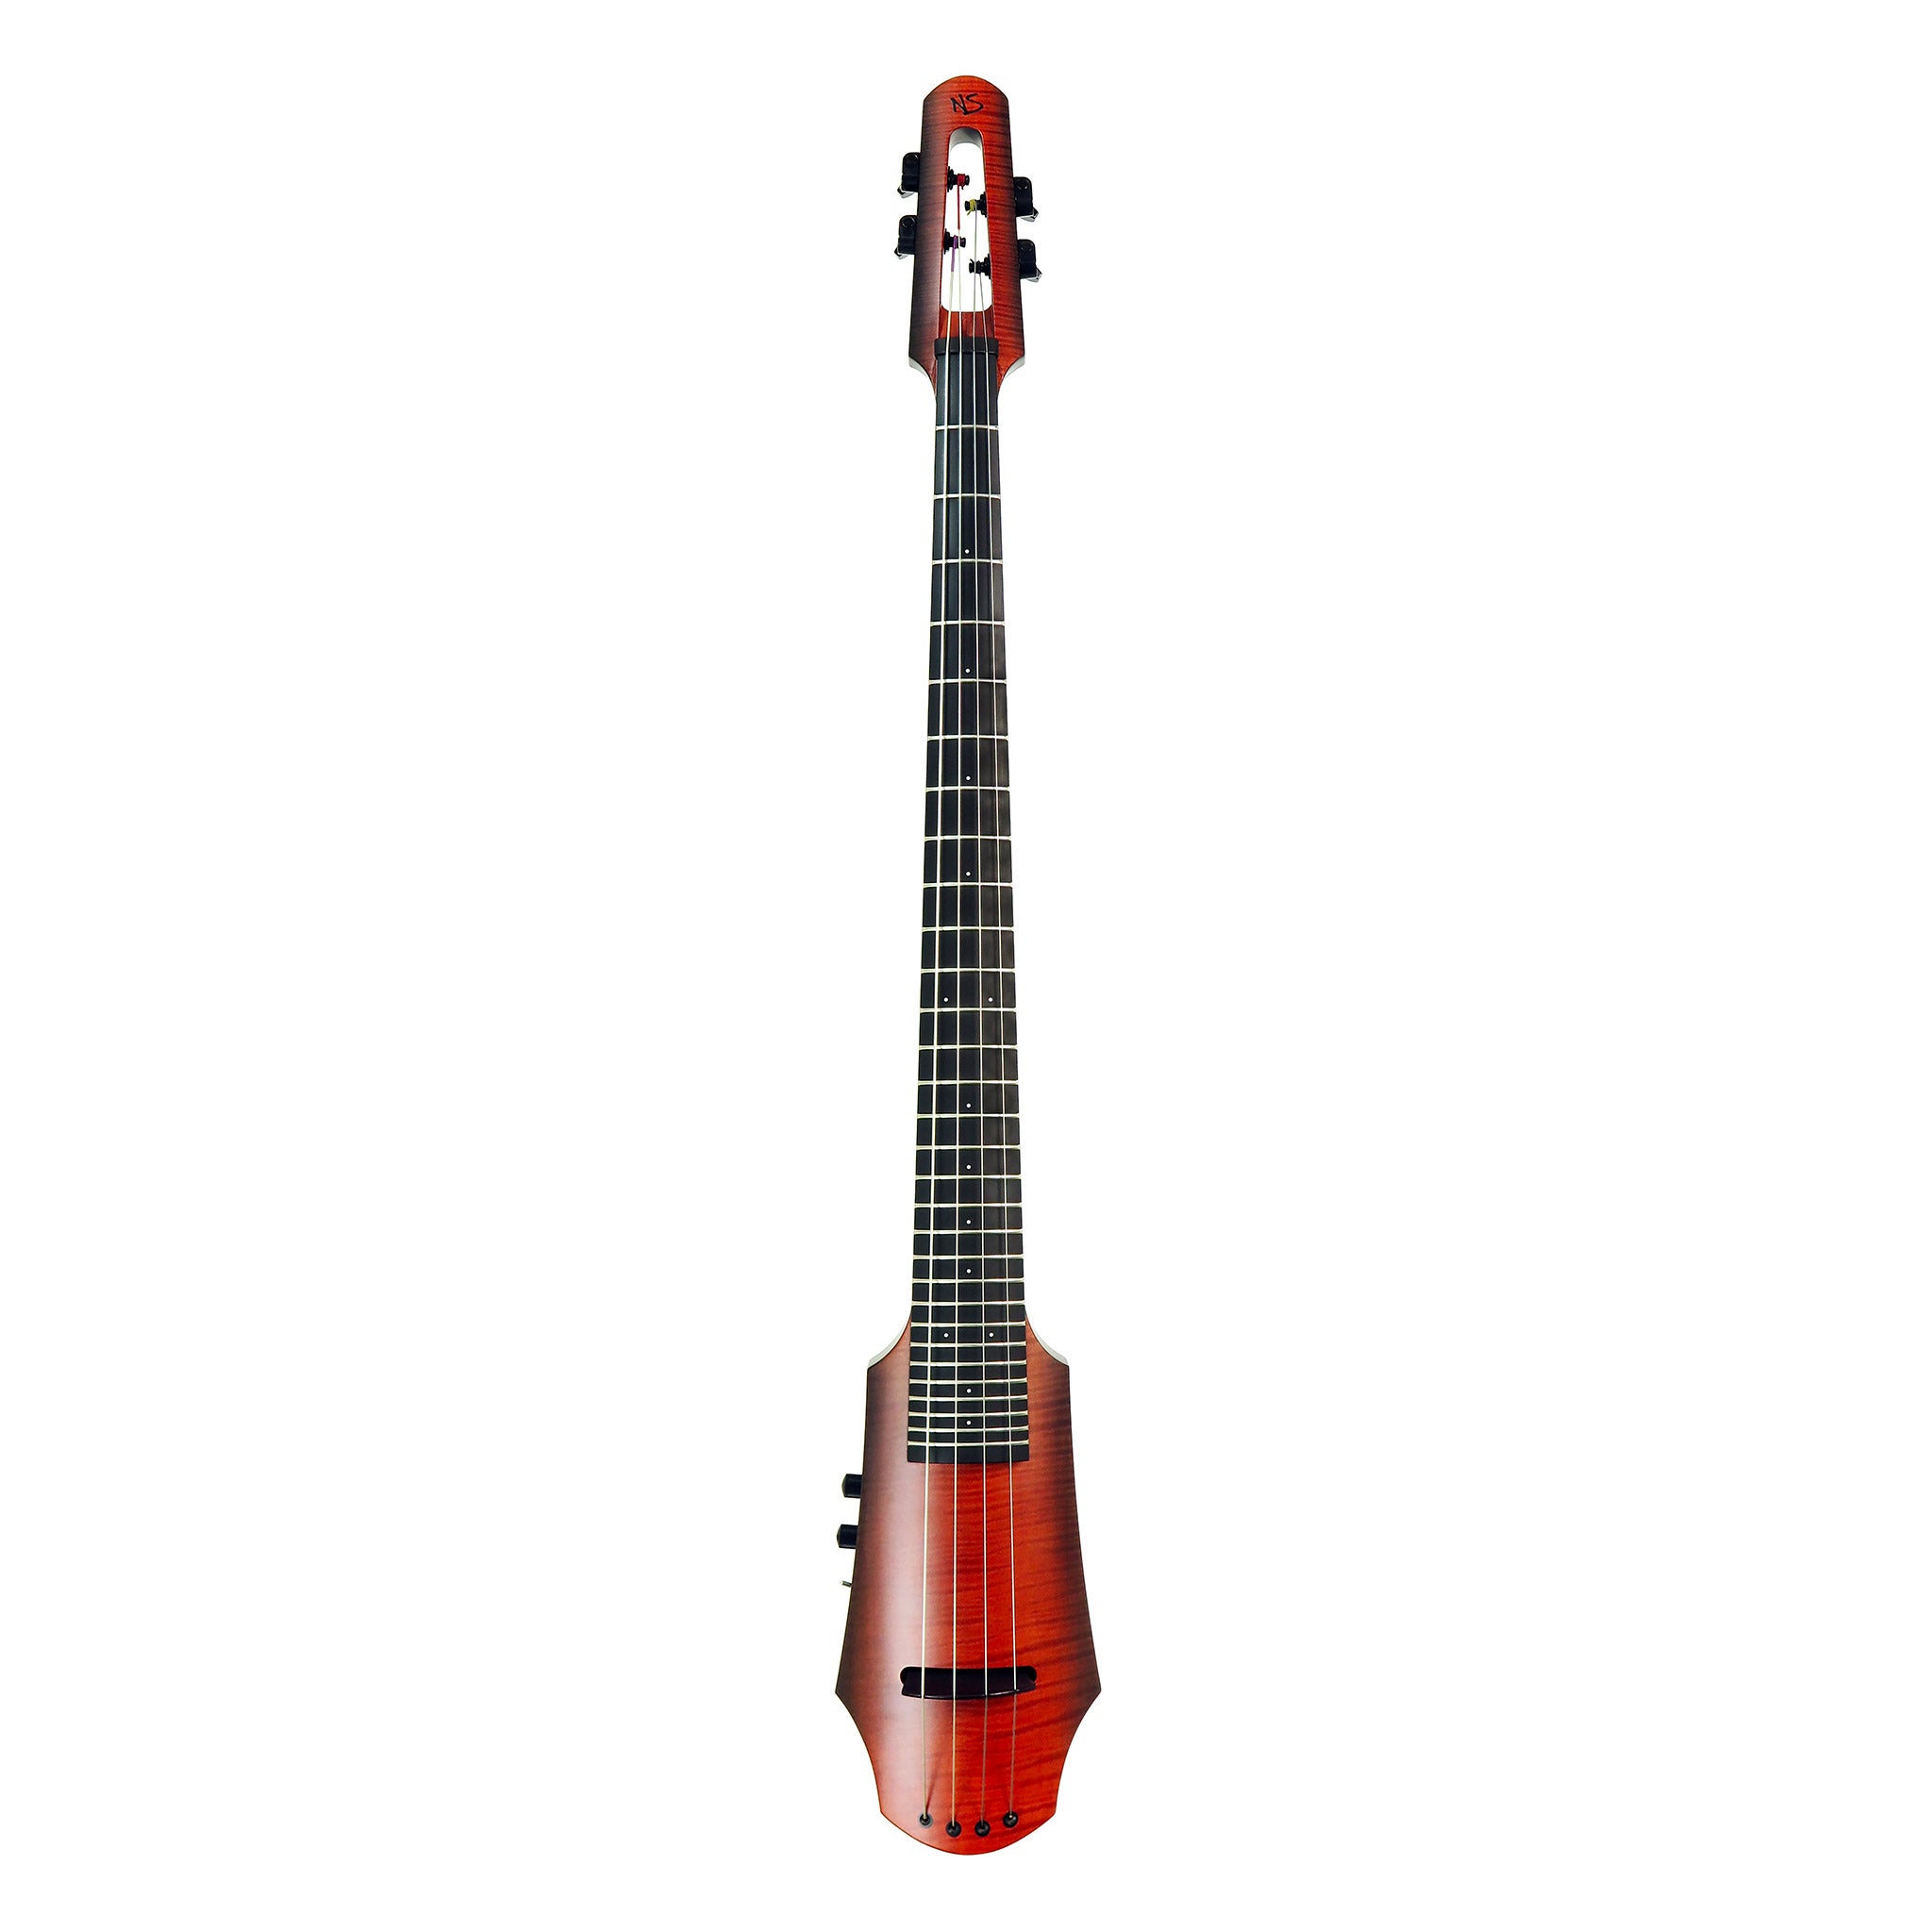 NS Design NXTa 4-string Fretted Electic Cello